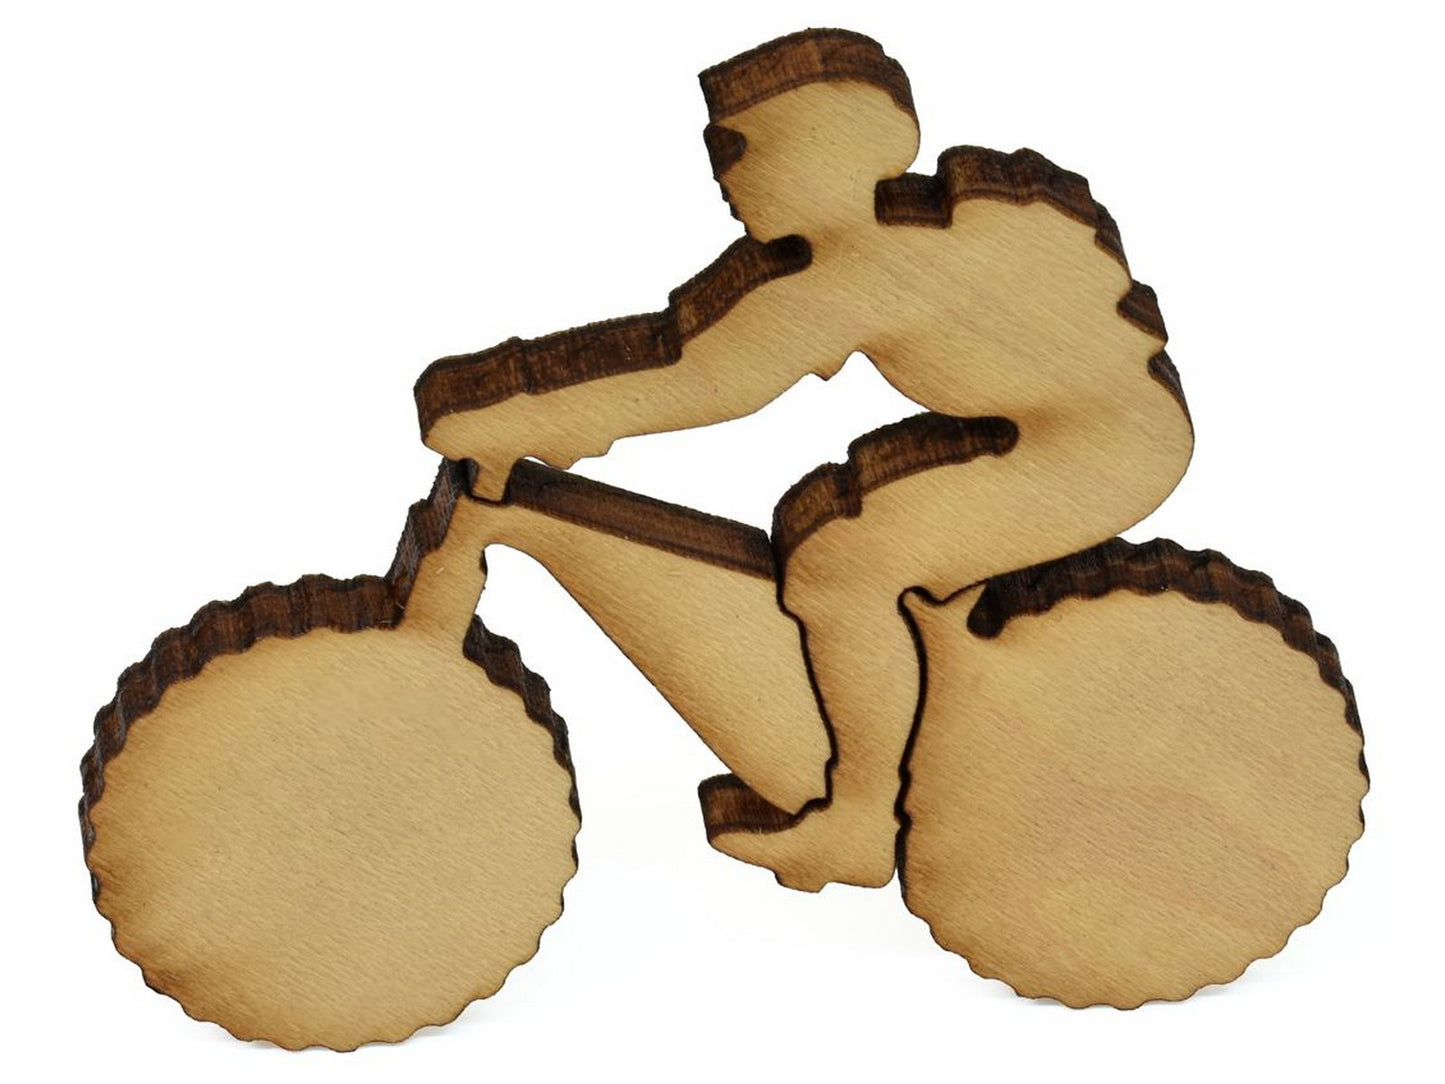 A closeup of pieces in the shape of a mountain biker.